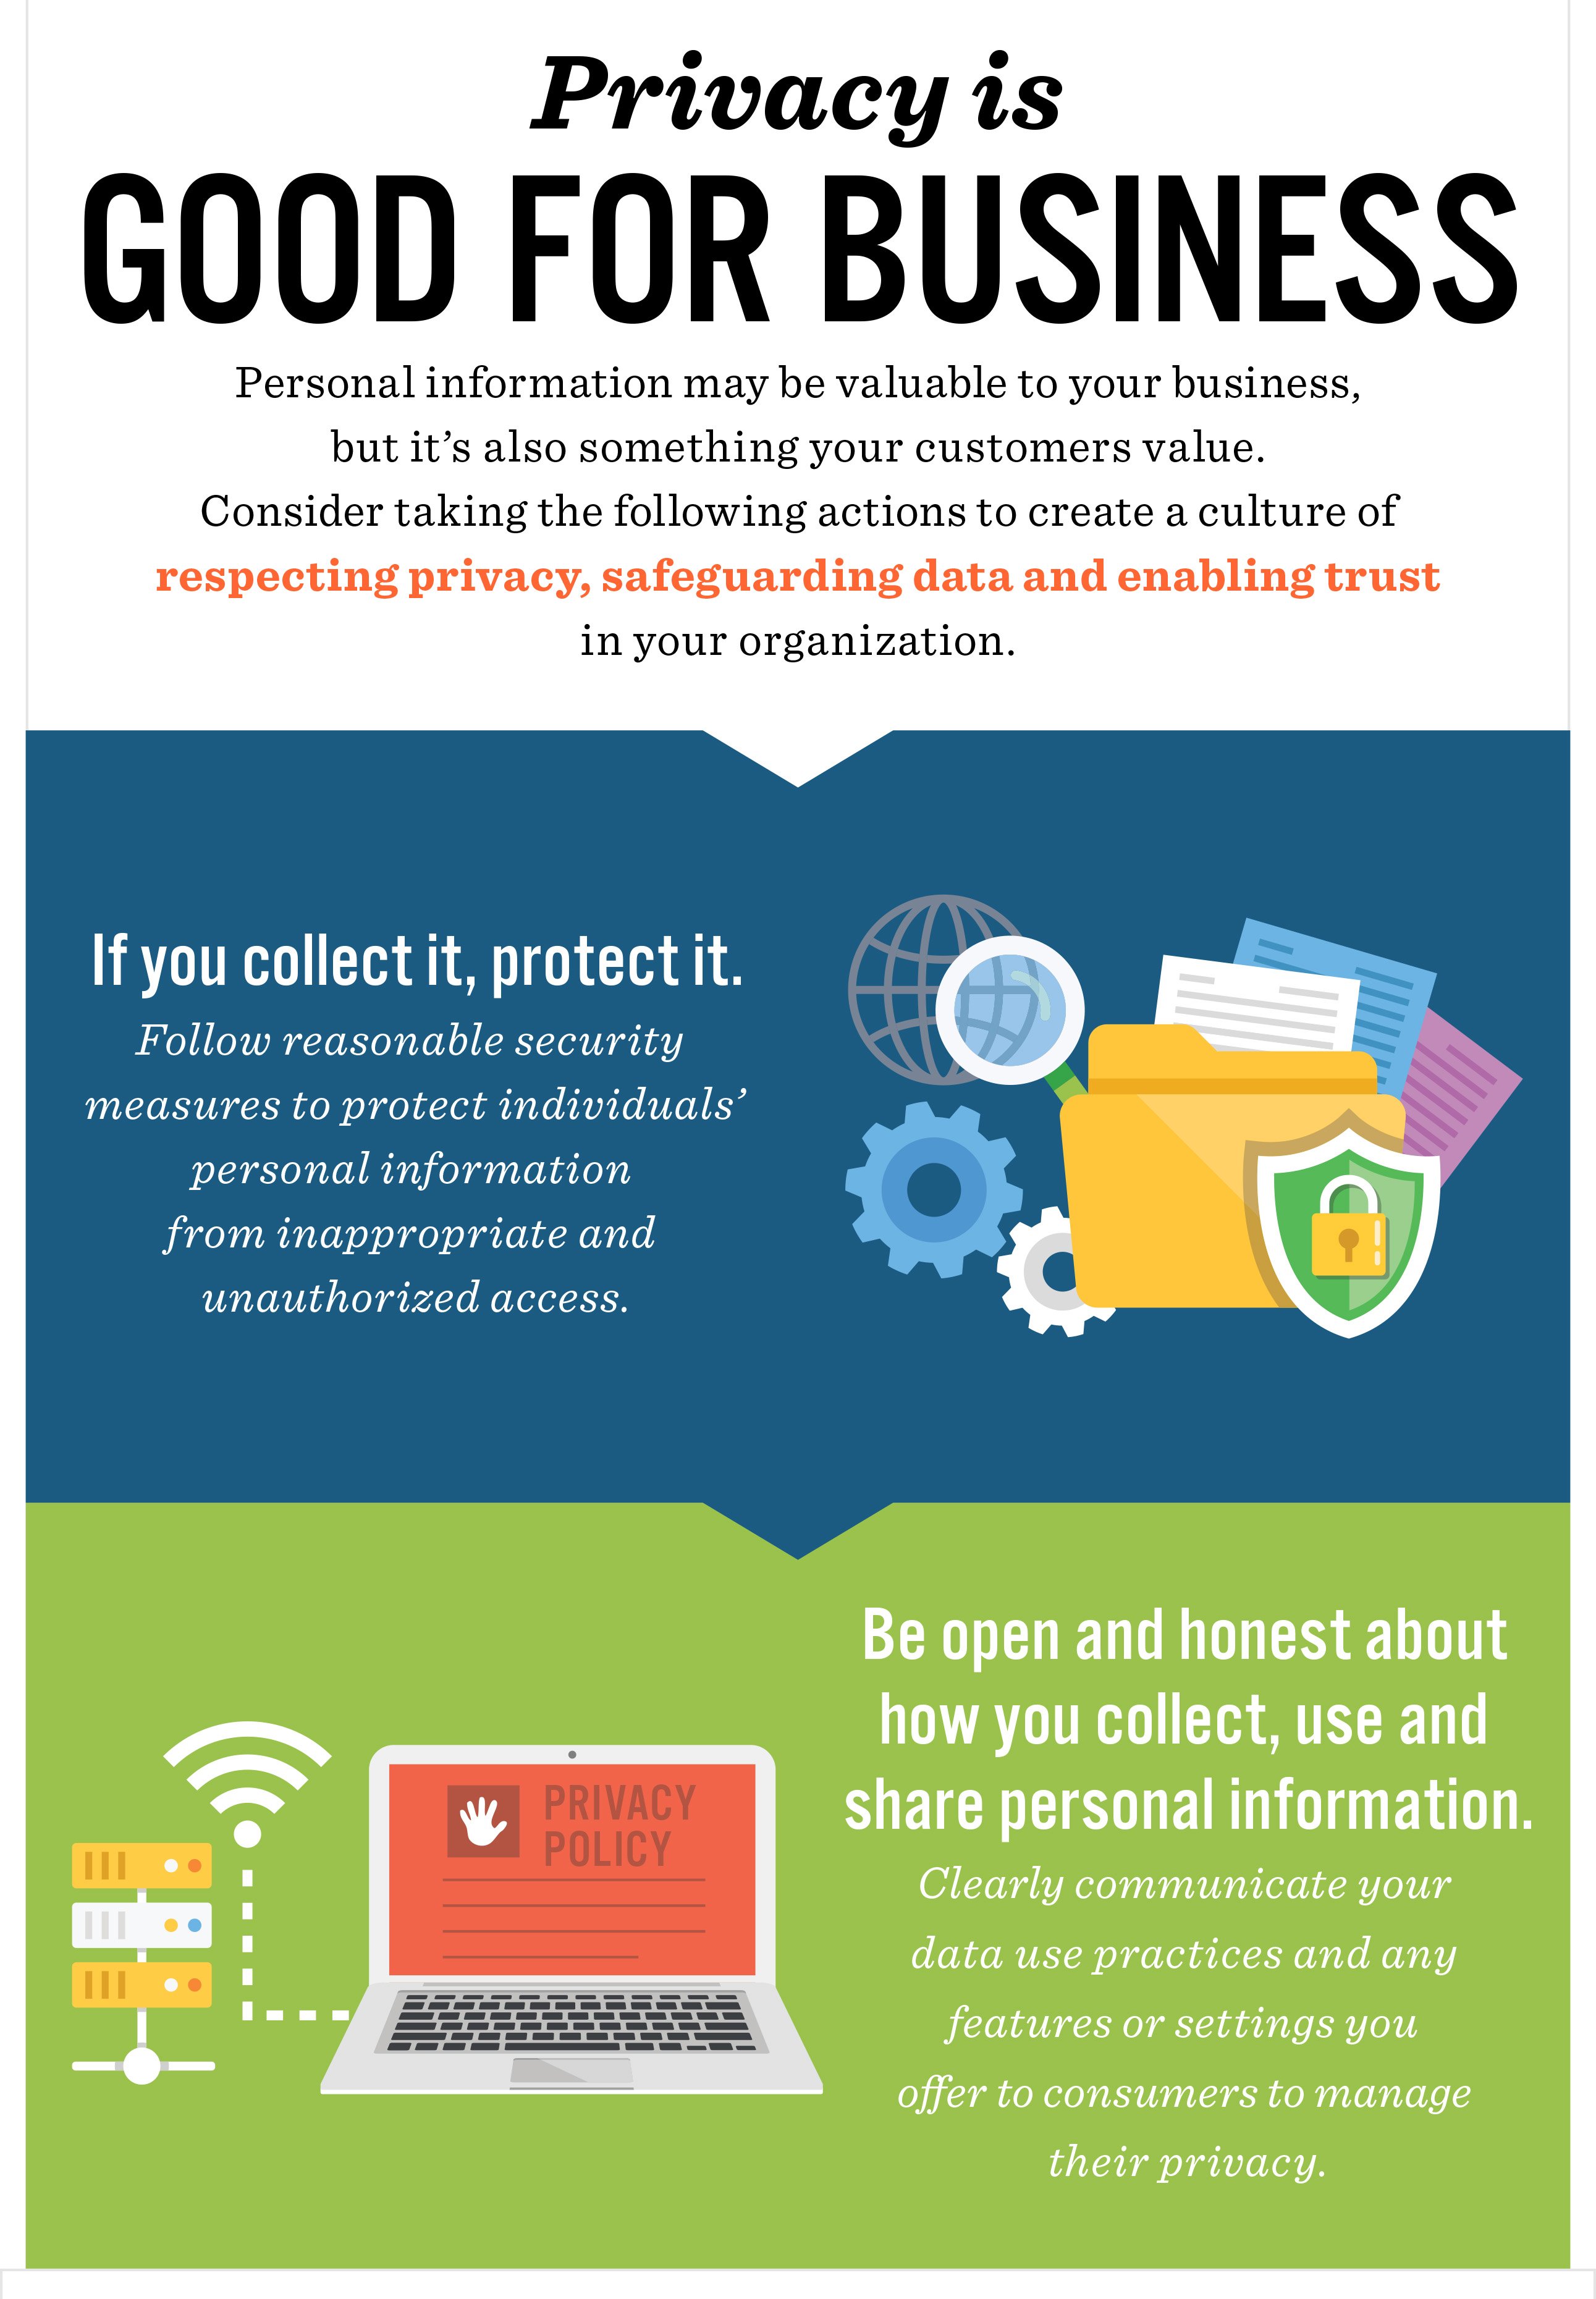 Privacy_Is_Good_For_Business_Infographic_DPD2017-preview copy